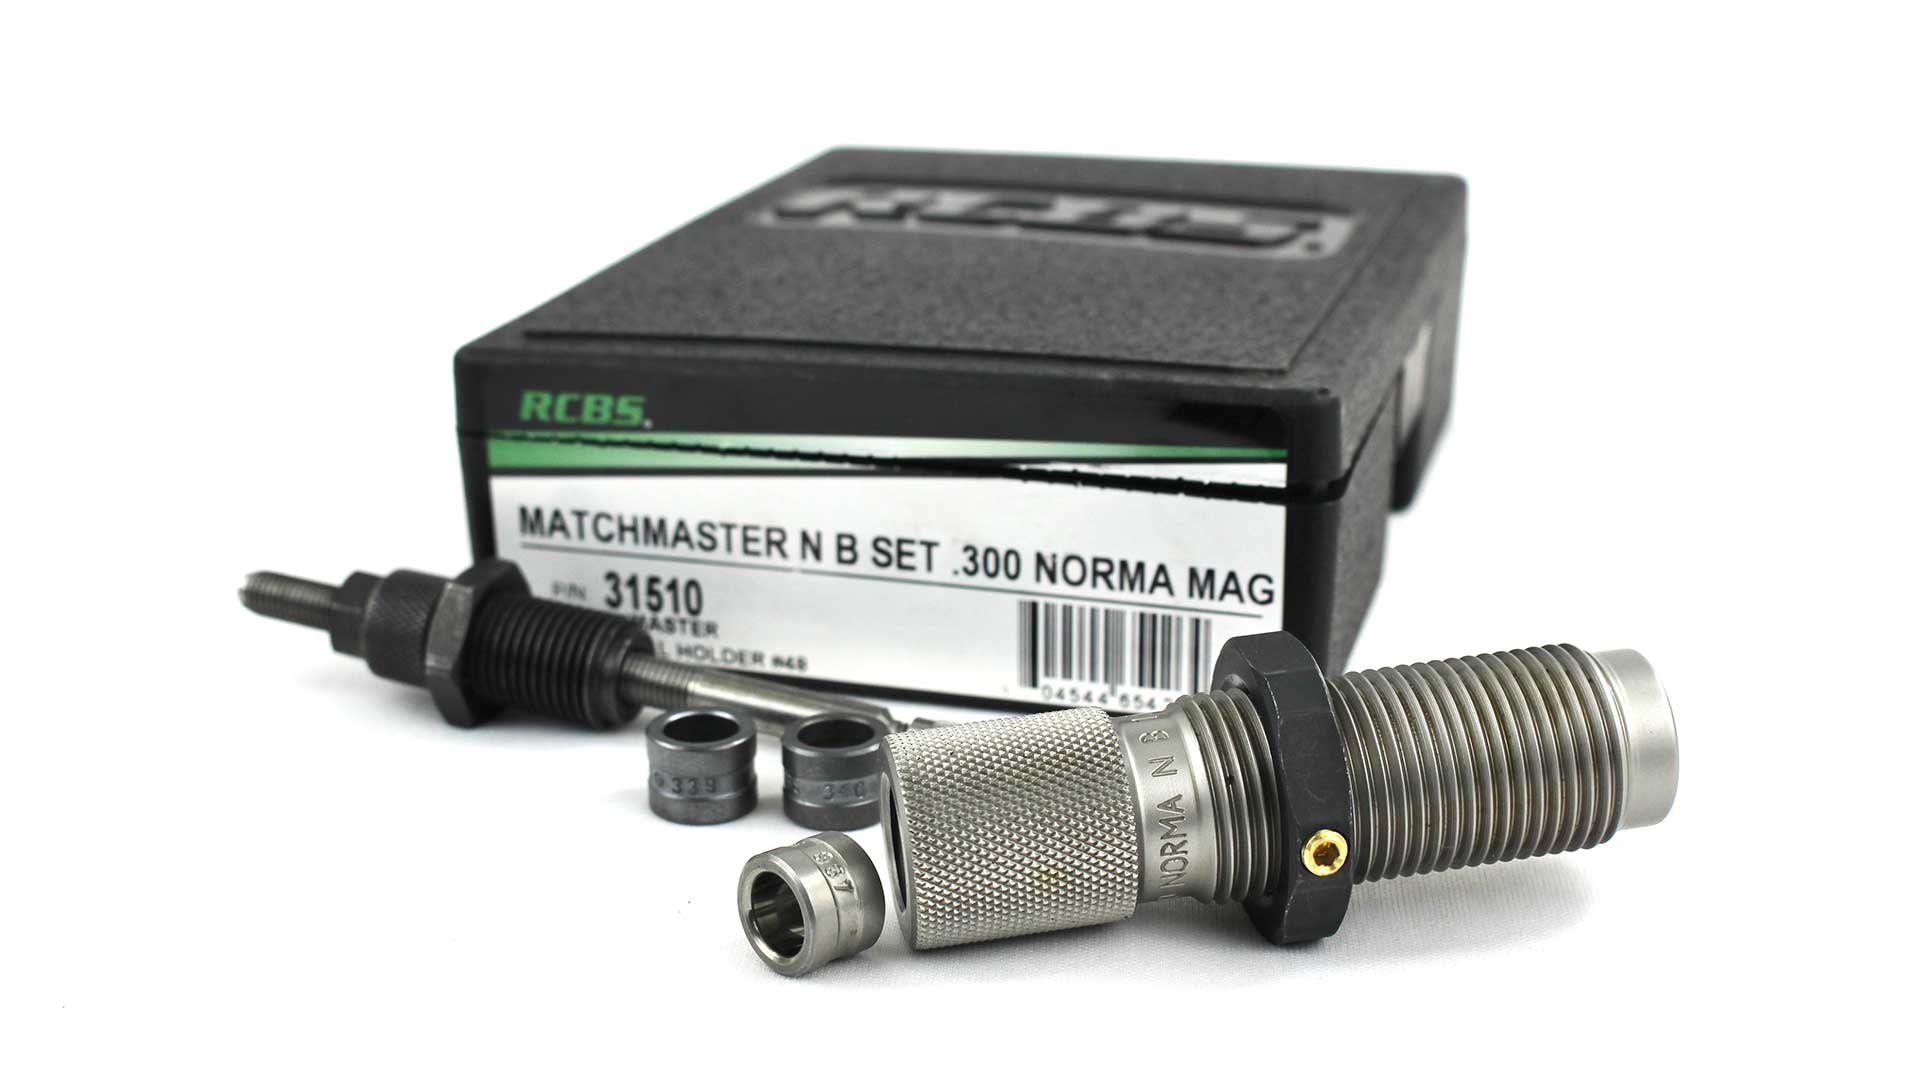 RCBS Matchmaster reloading die set with box for .300 Norma Magnum rifle cartridges